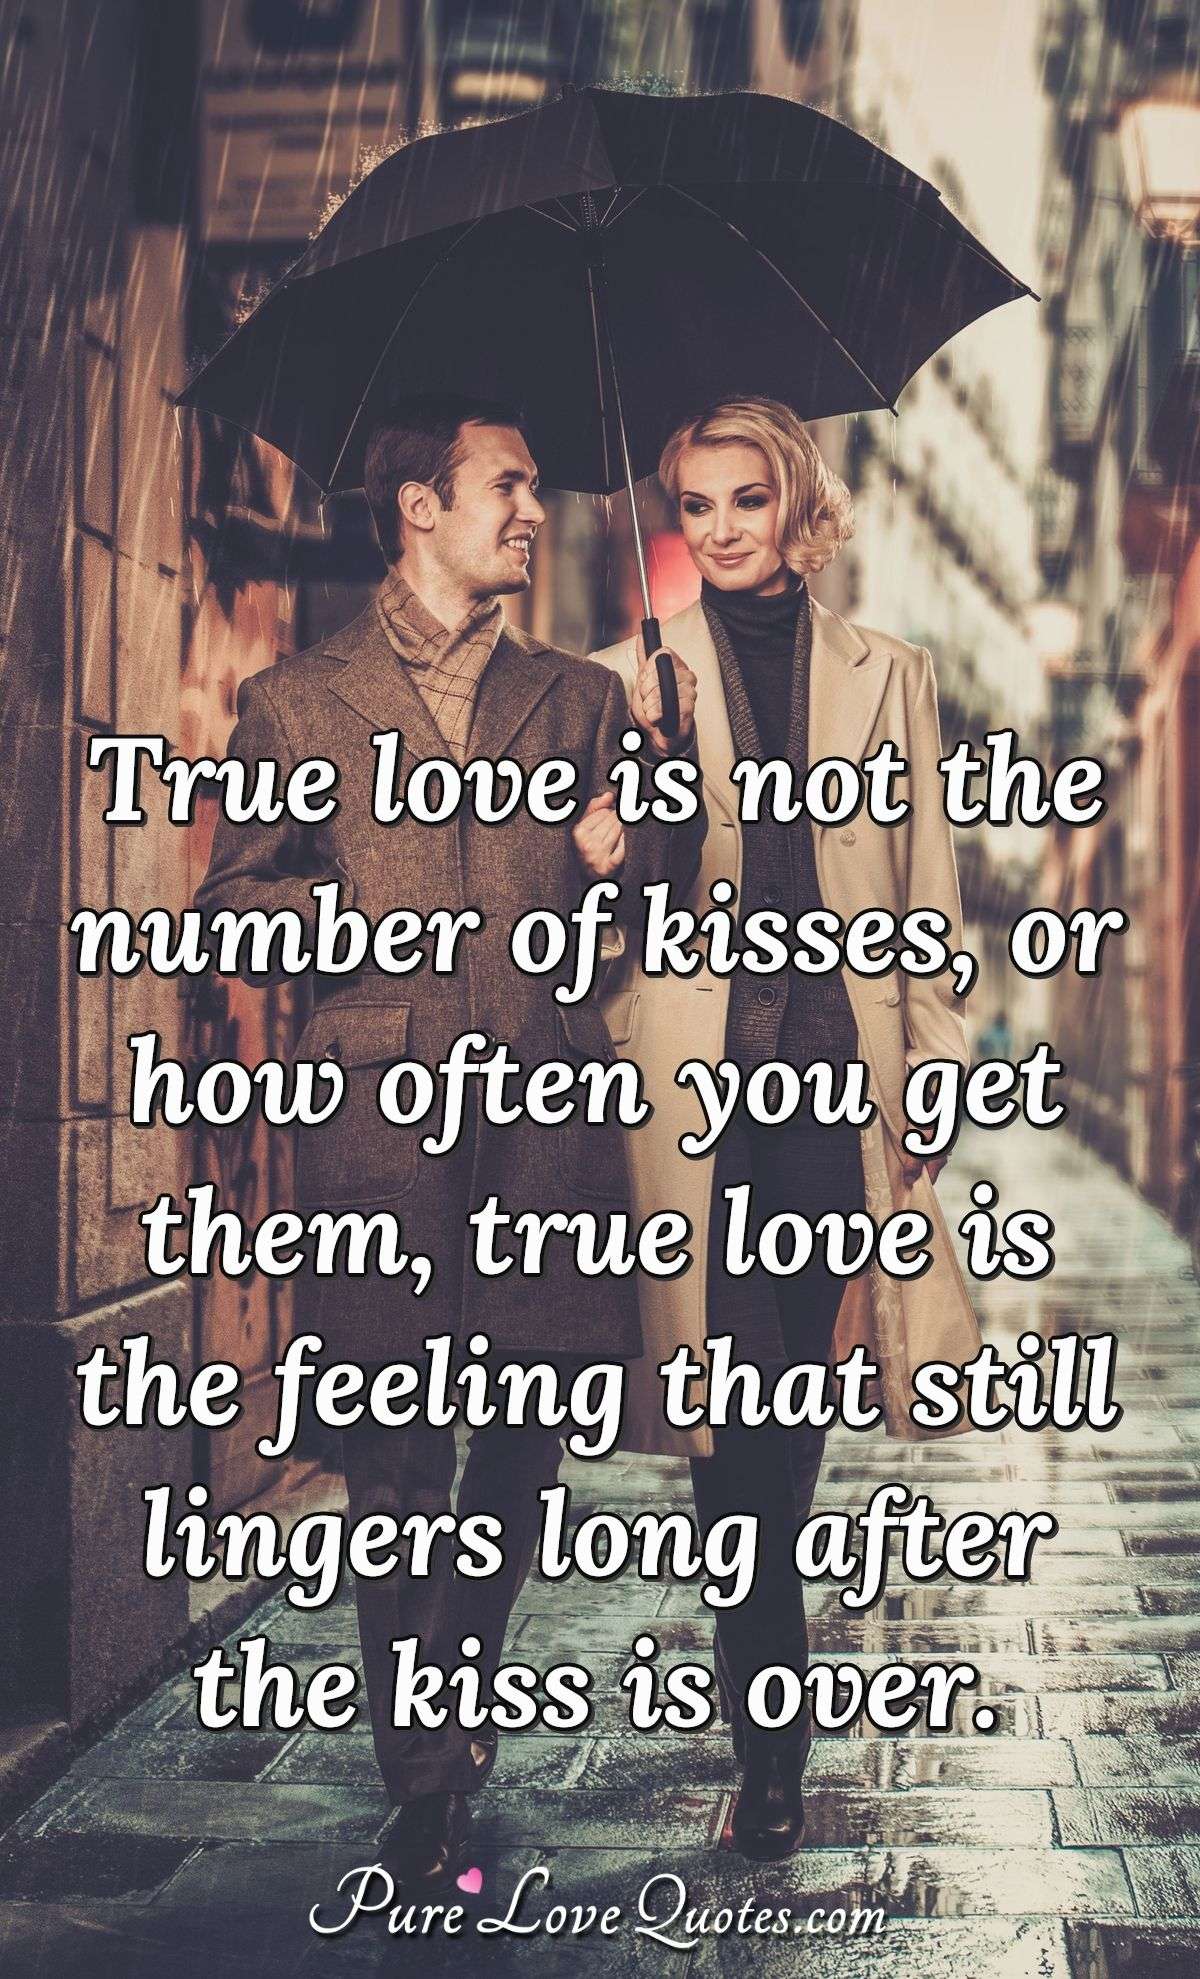 True love is not the number of kisses, or how often you get them, true love is the feeling that still lingers long after the kiss is over. - Anonymous